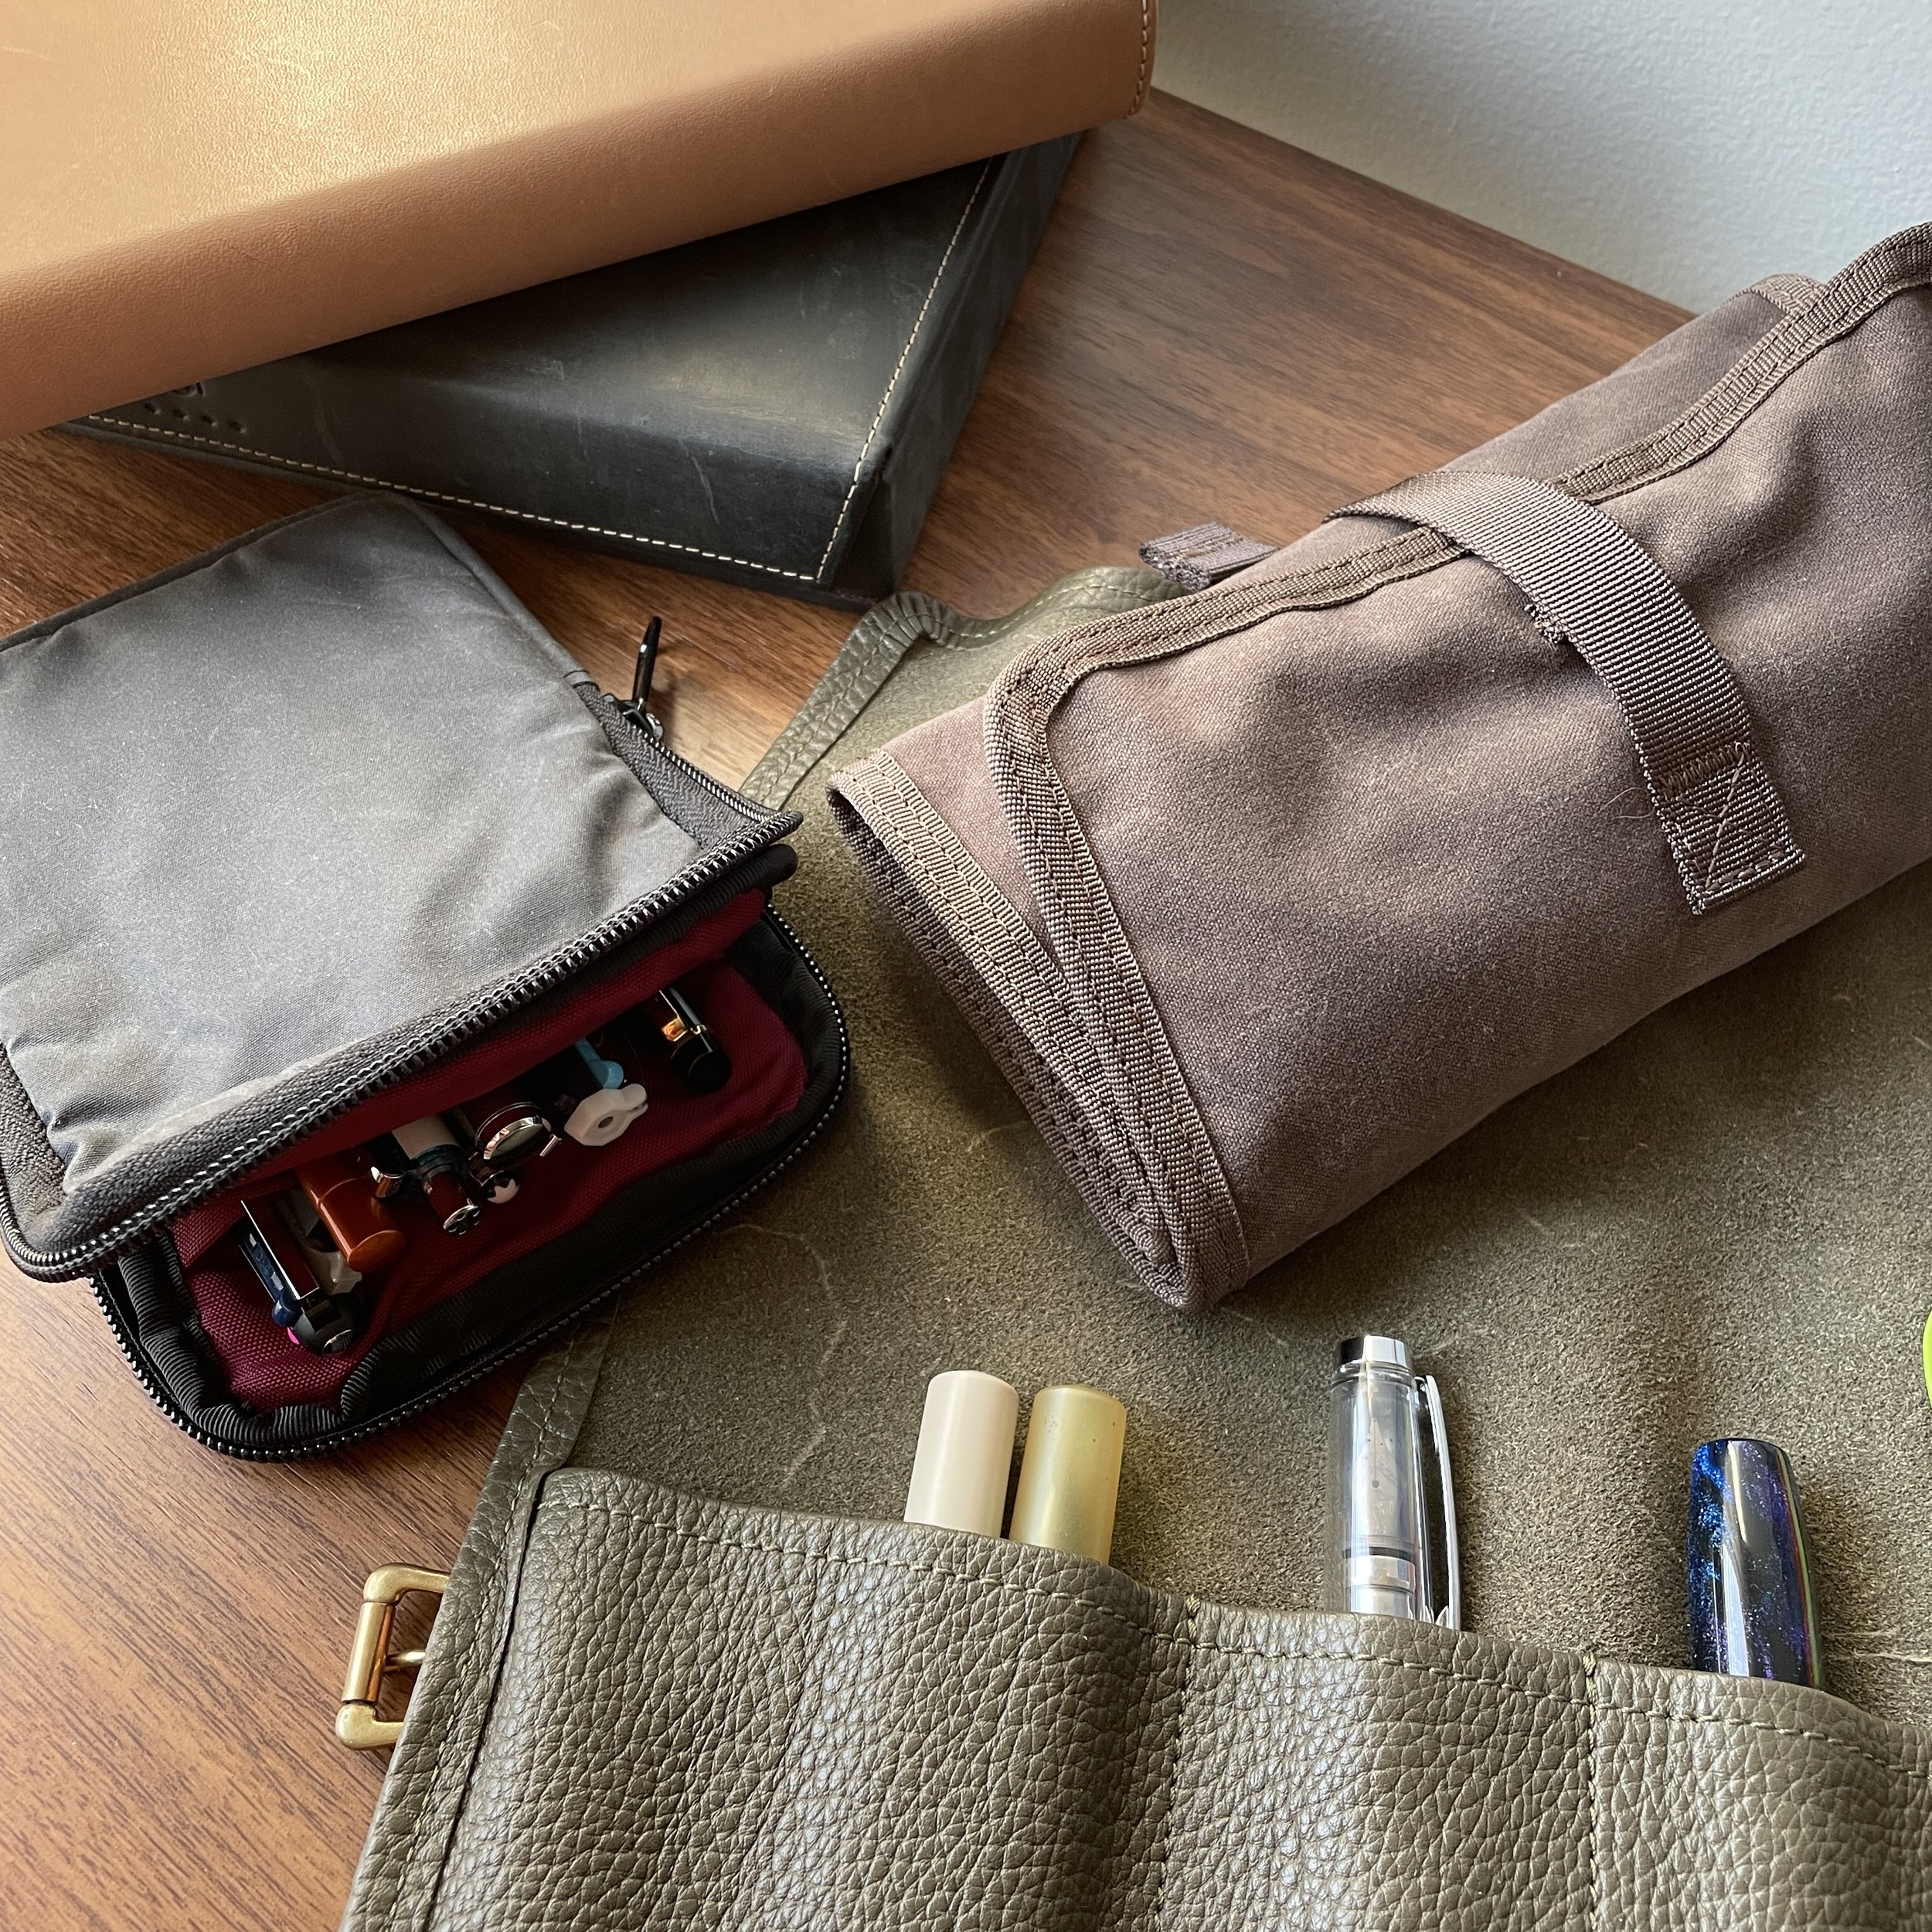 Pen Roll vs. Pen Case: Why Consider One Over The Other? — The